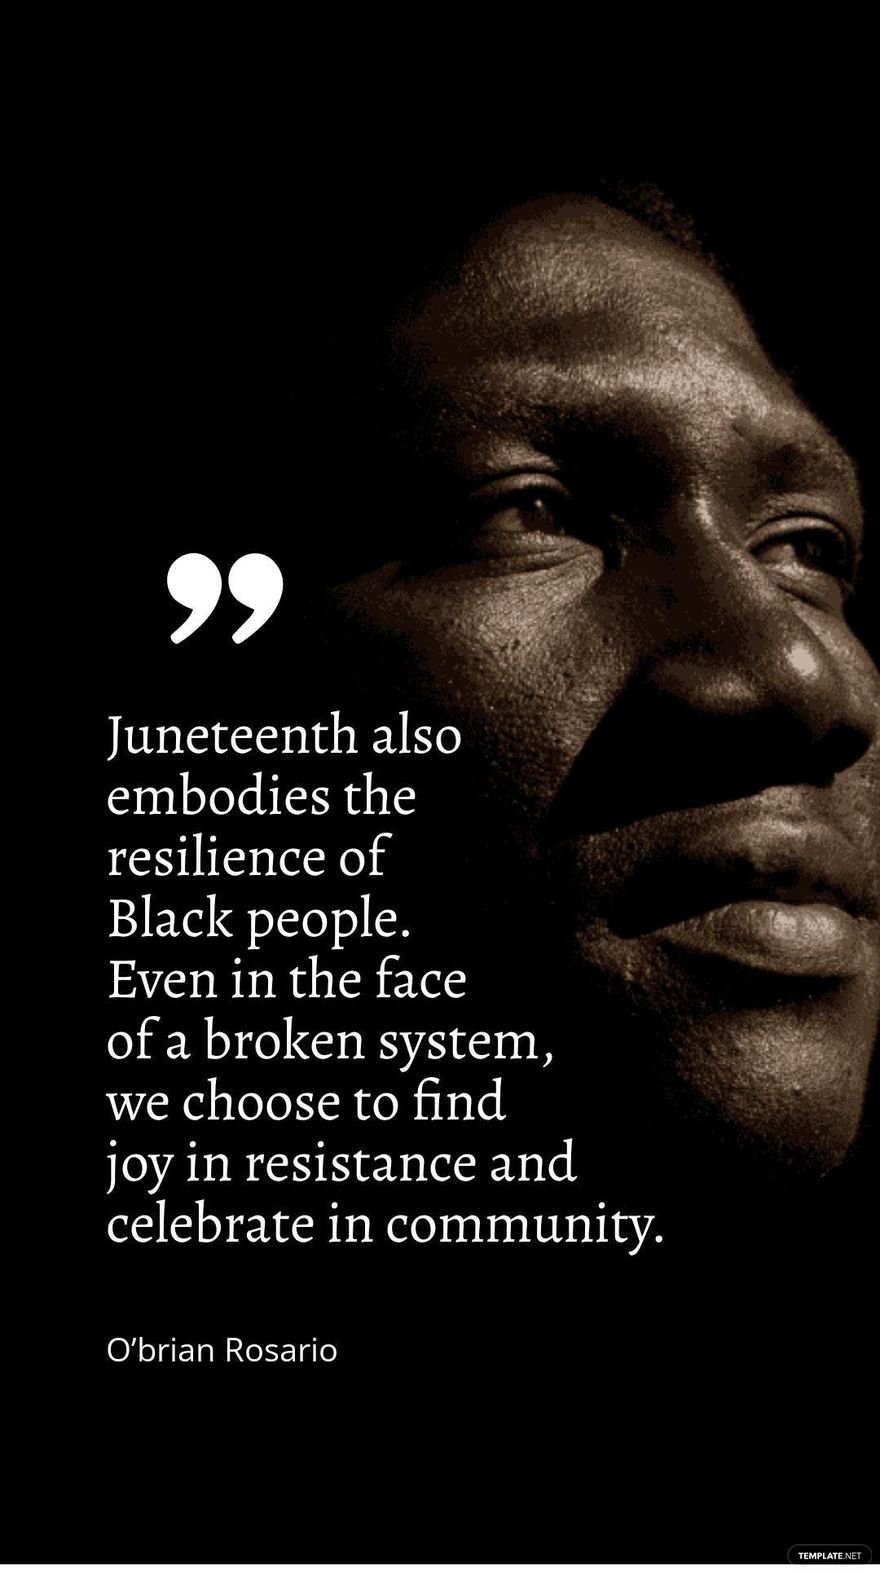 Free O’brian Rosario - Juneteenth also embodies the resilience of Black people. Even in the face of a broken system, we choose to find joy in resistance and celebrate in community.